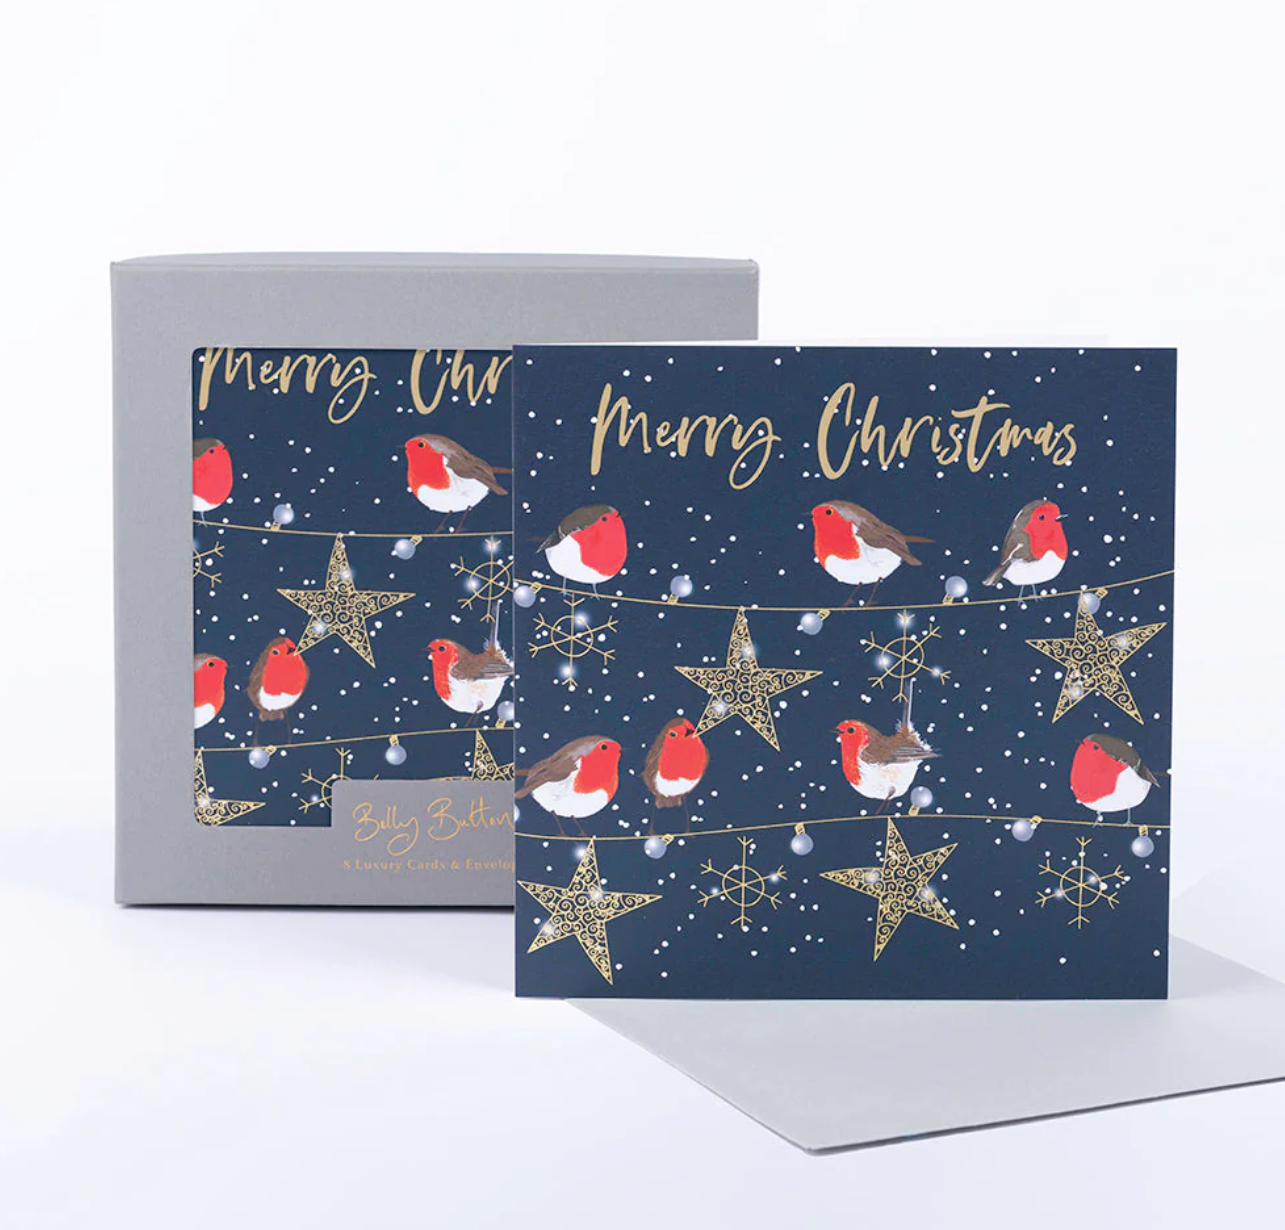 Belly Button Robins Luxury Box Christmas Cards - 8 Pack